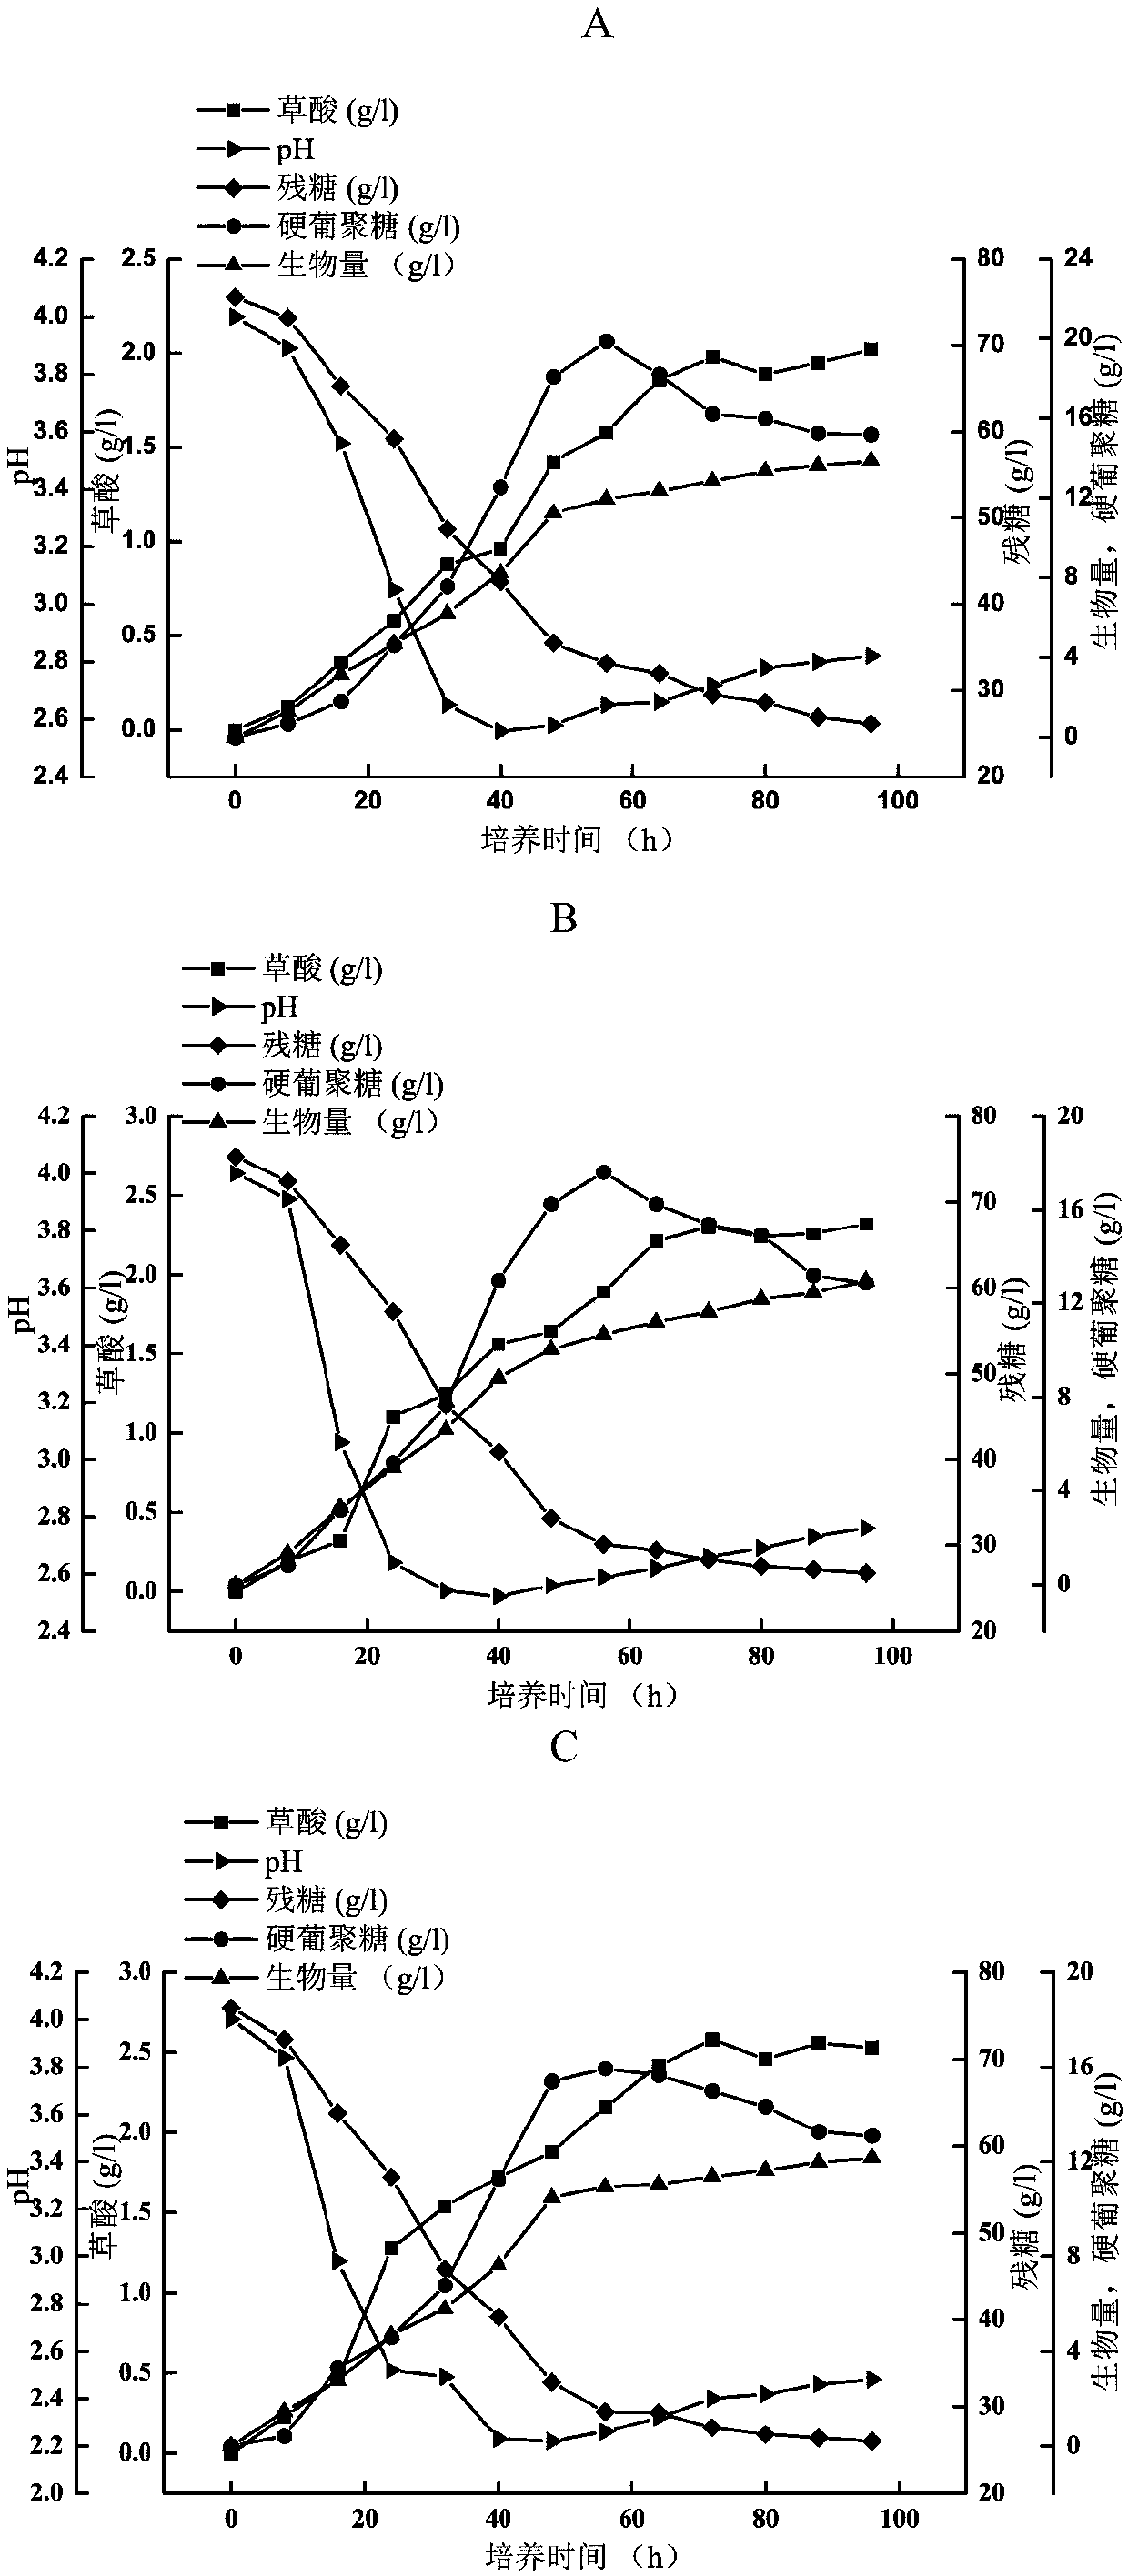 (Sclerotium rolfsii)WSH-G01 and method for producing scleroglucan by fermenting (Sclerotium rolfsii)WSH-G01